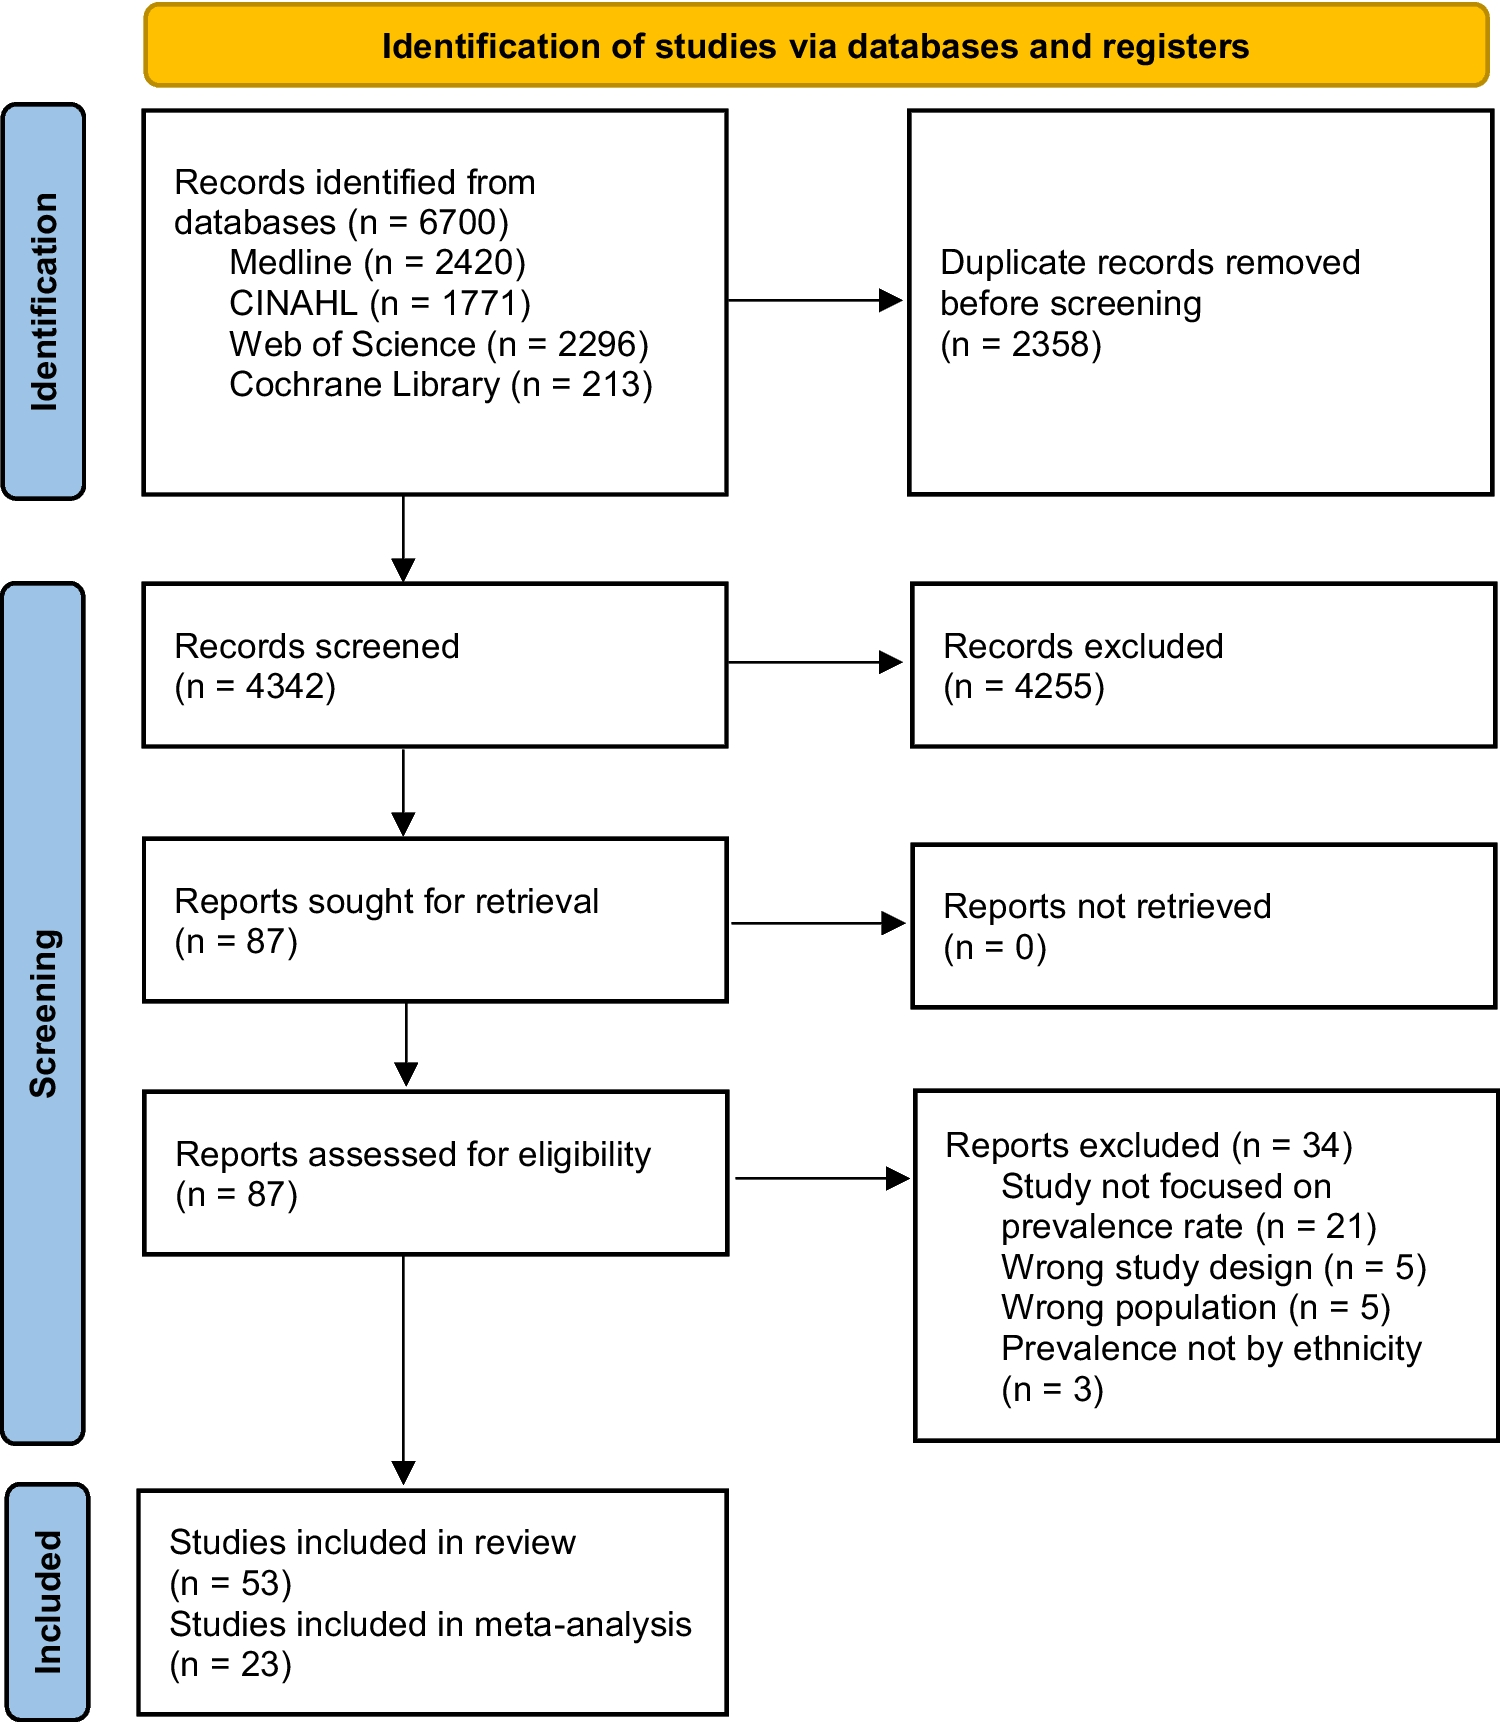 Ethnic differences in metabolic syndrome in high-income countries: A systematic review and meta-analysis